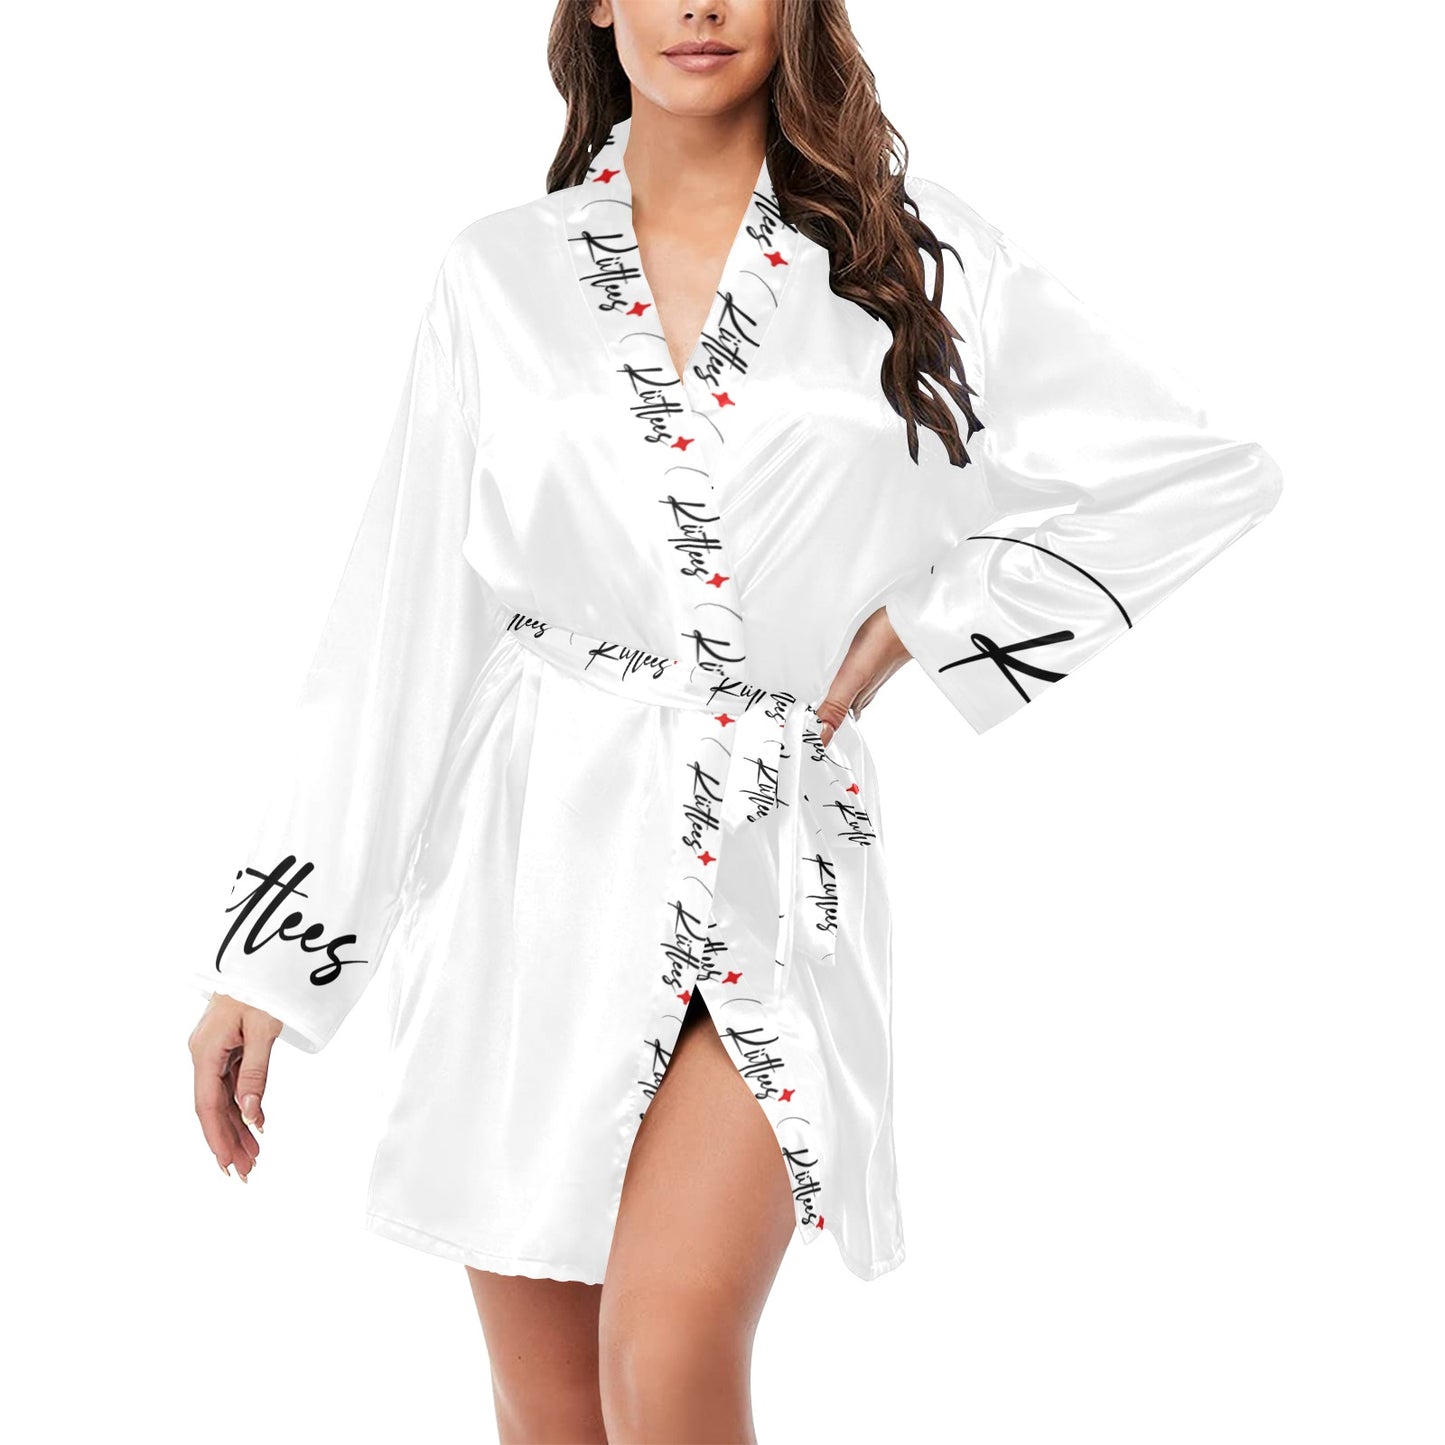 Ruttees Signature Women's Long Sleeve Belted Night Robe